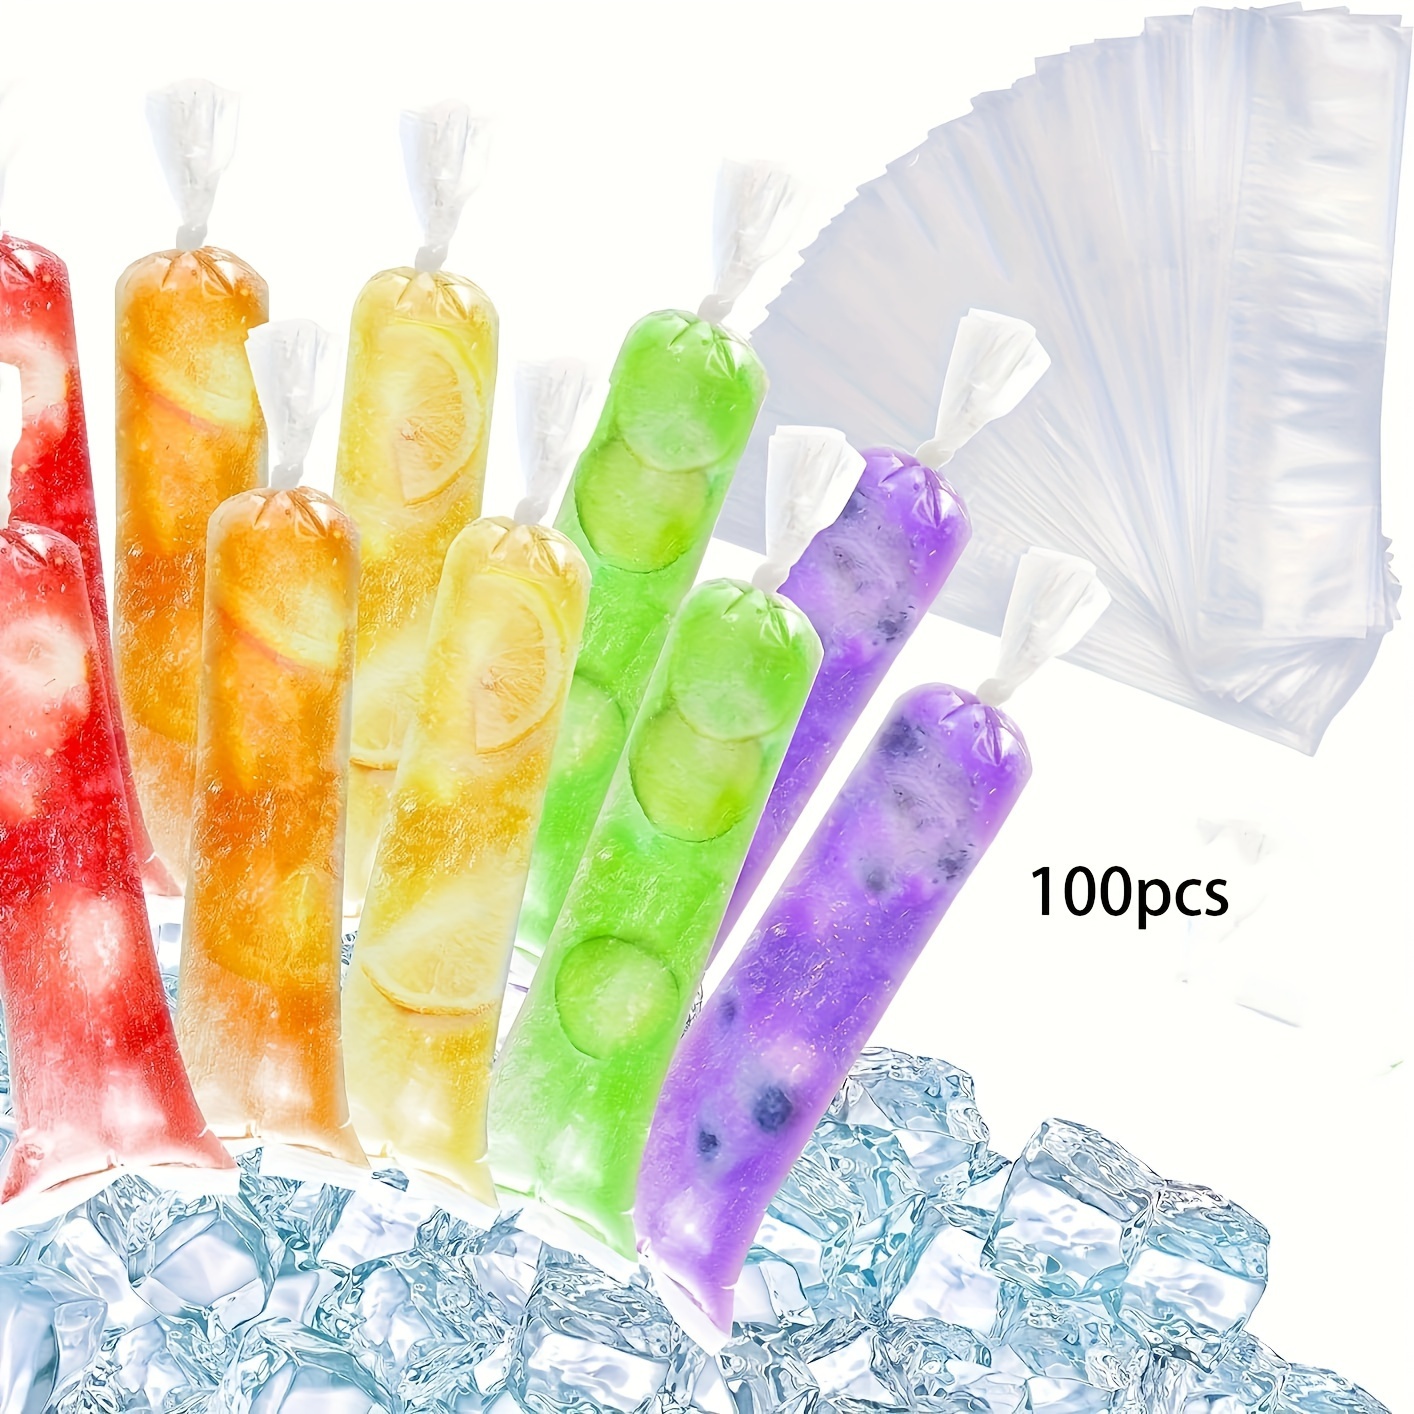 

100pcs, Clear Plastic Ice Pop Bags, Homemade Diy Freezer Stick Ice Cream Pouches, Crushed Ice Packaging Bags For Home Use